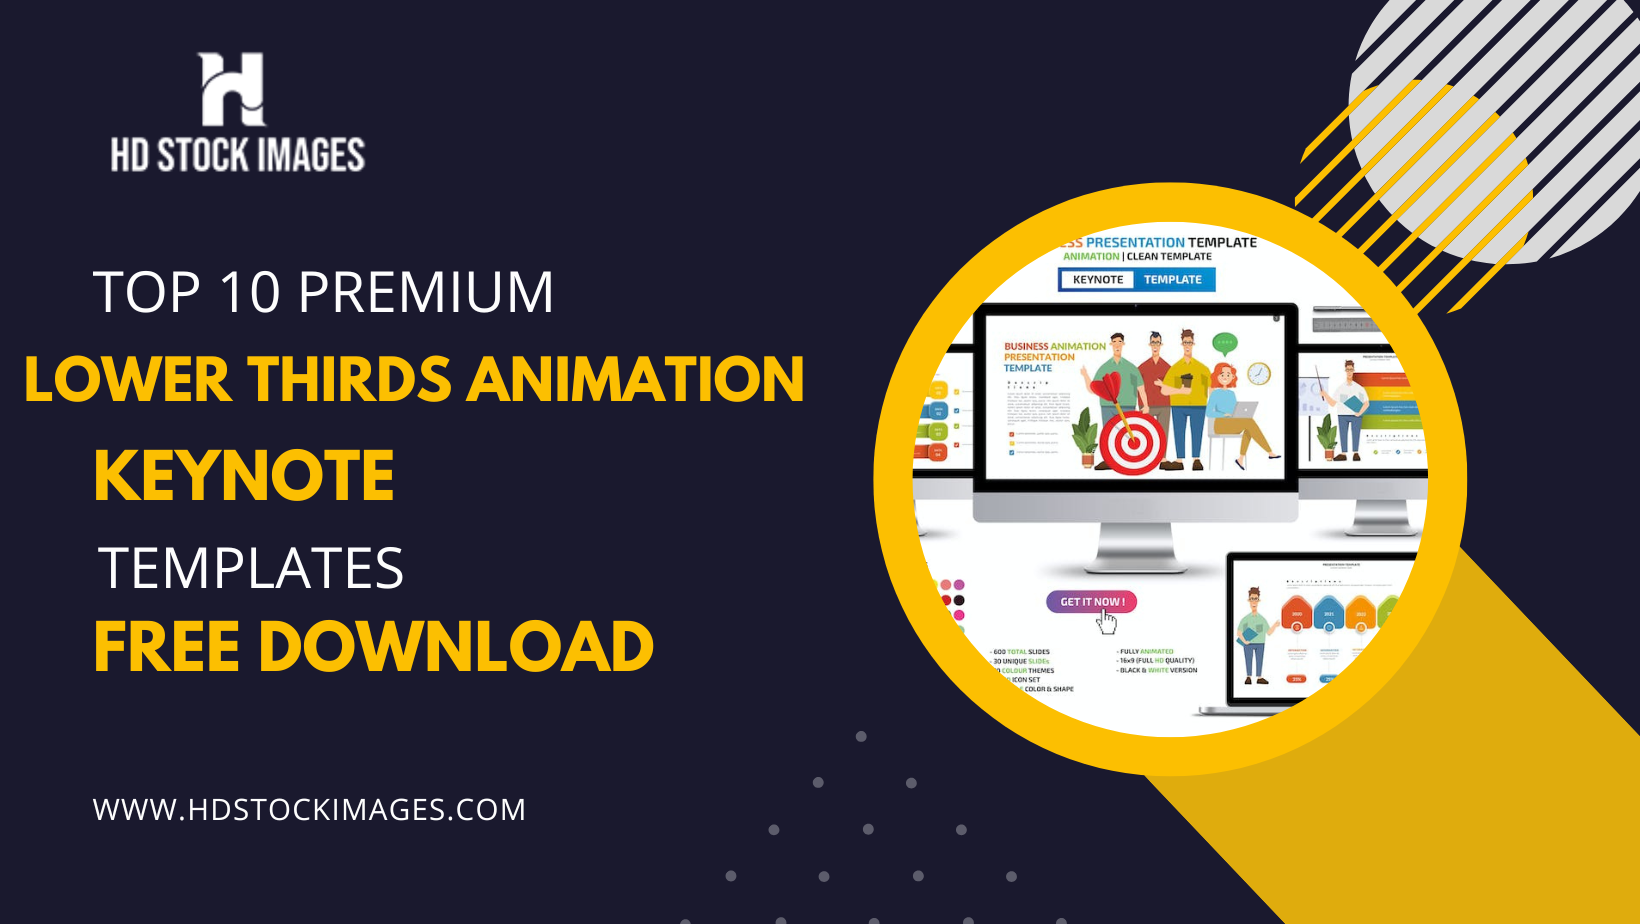 Top 10 Premium Lower Thirds Animation Keynote Templates Free Download